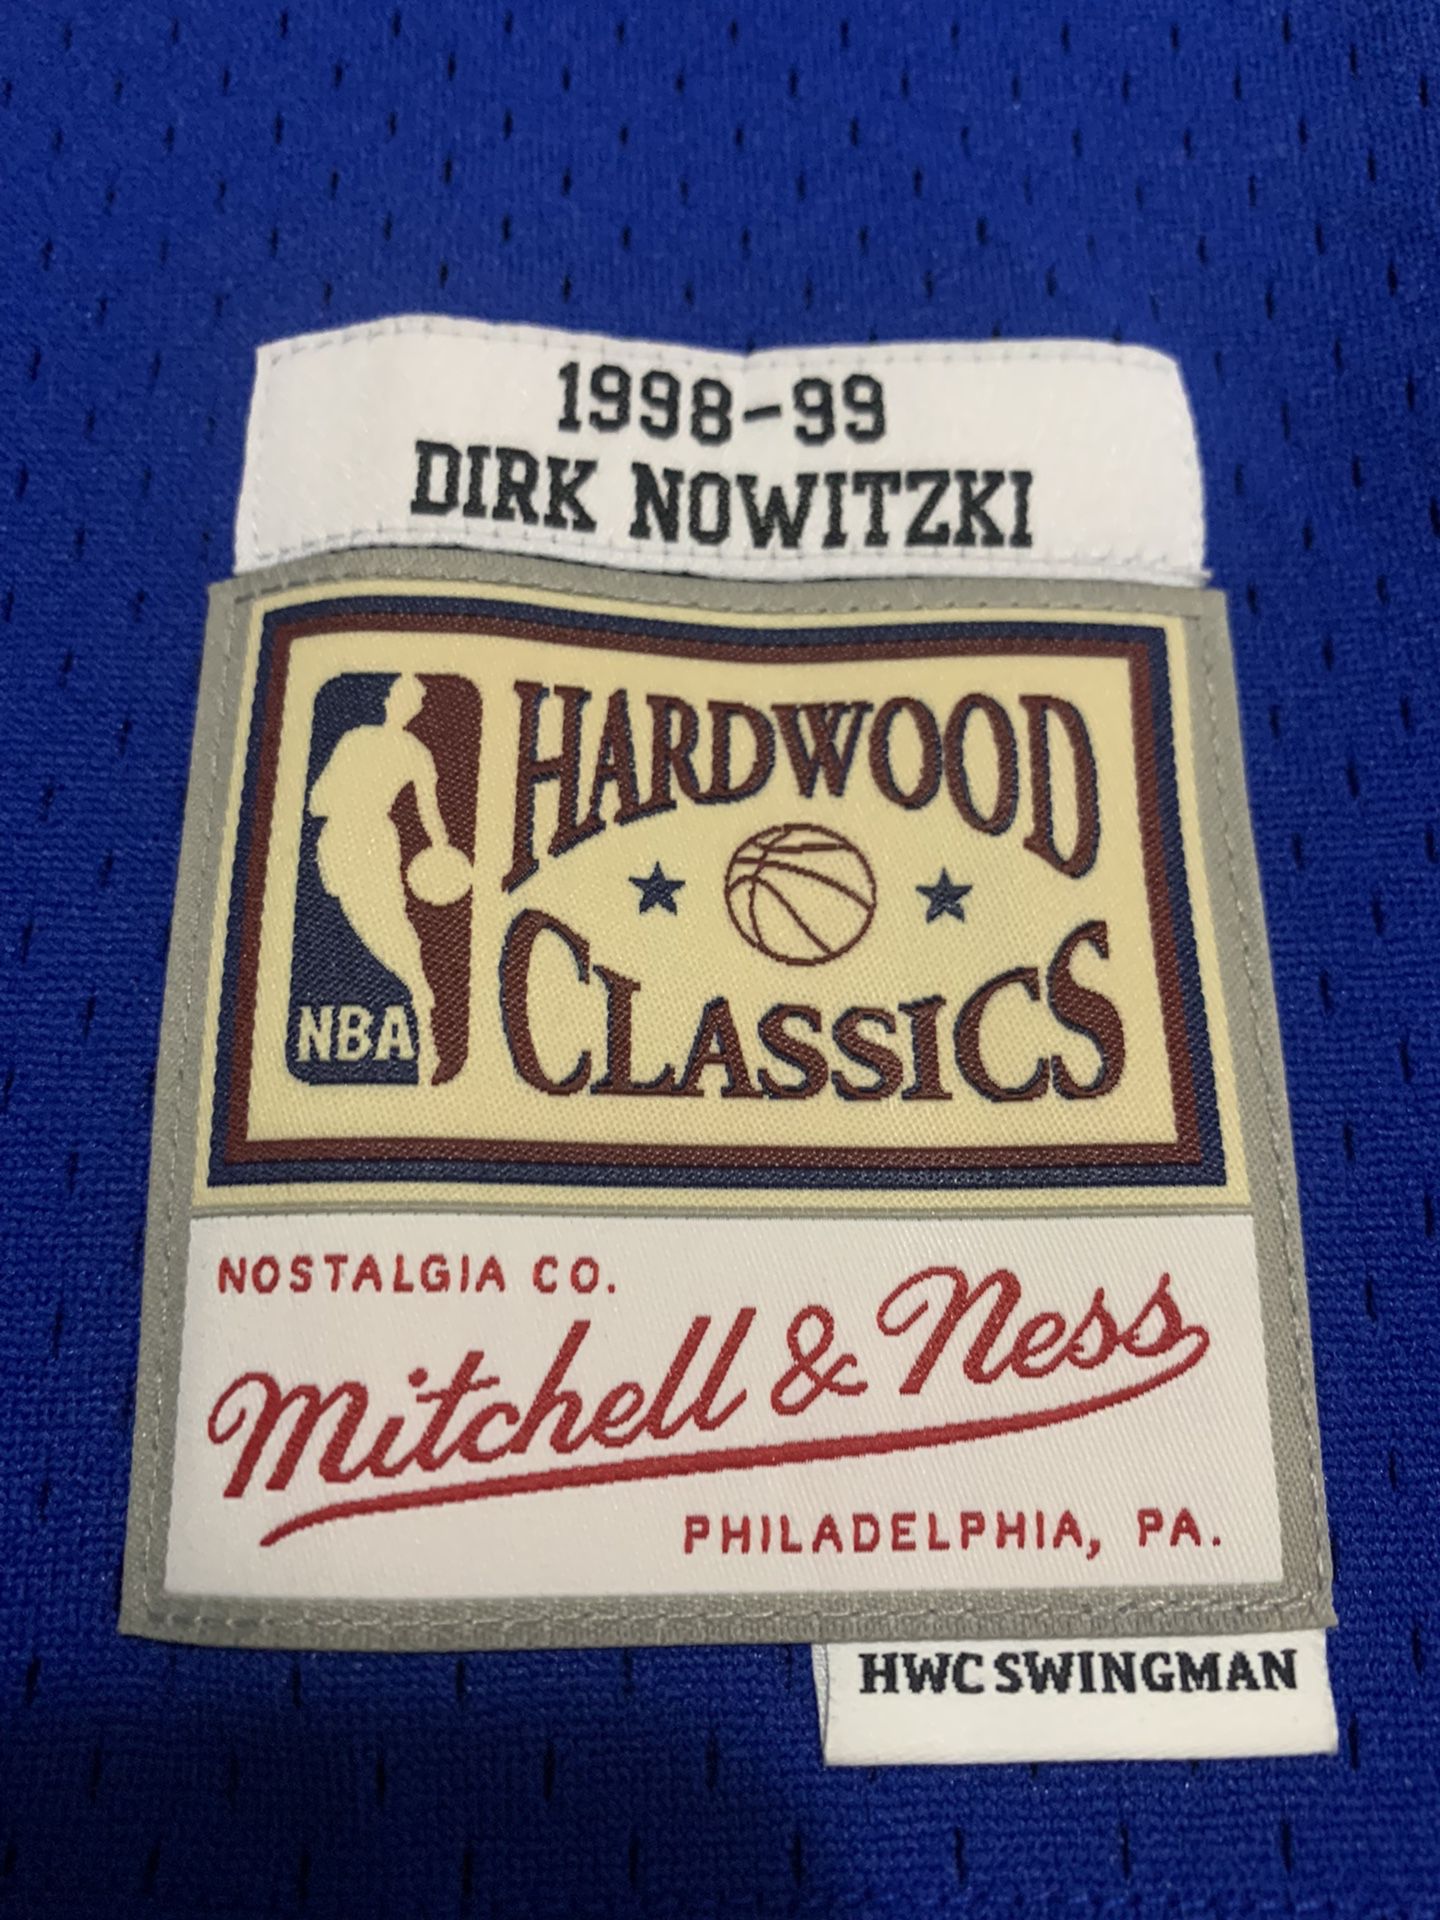 Dirk Nowitzki 2008 West All Star Game Jersey for Sale in Plano, TX - OfferUp